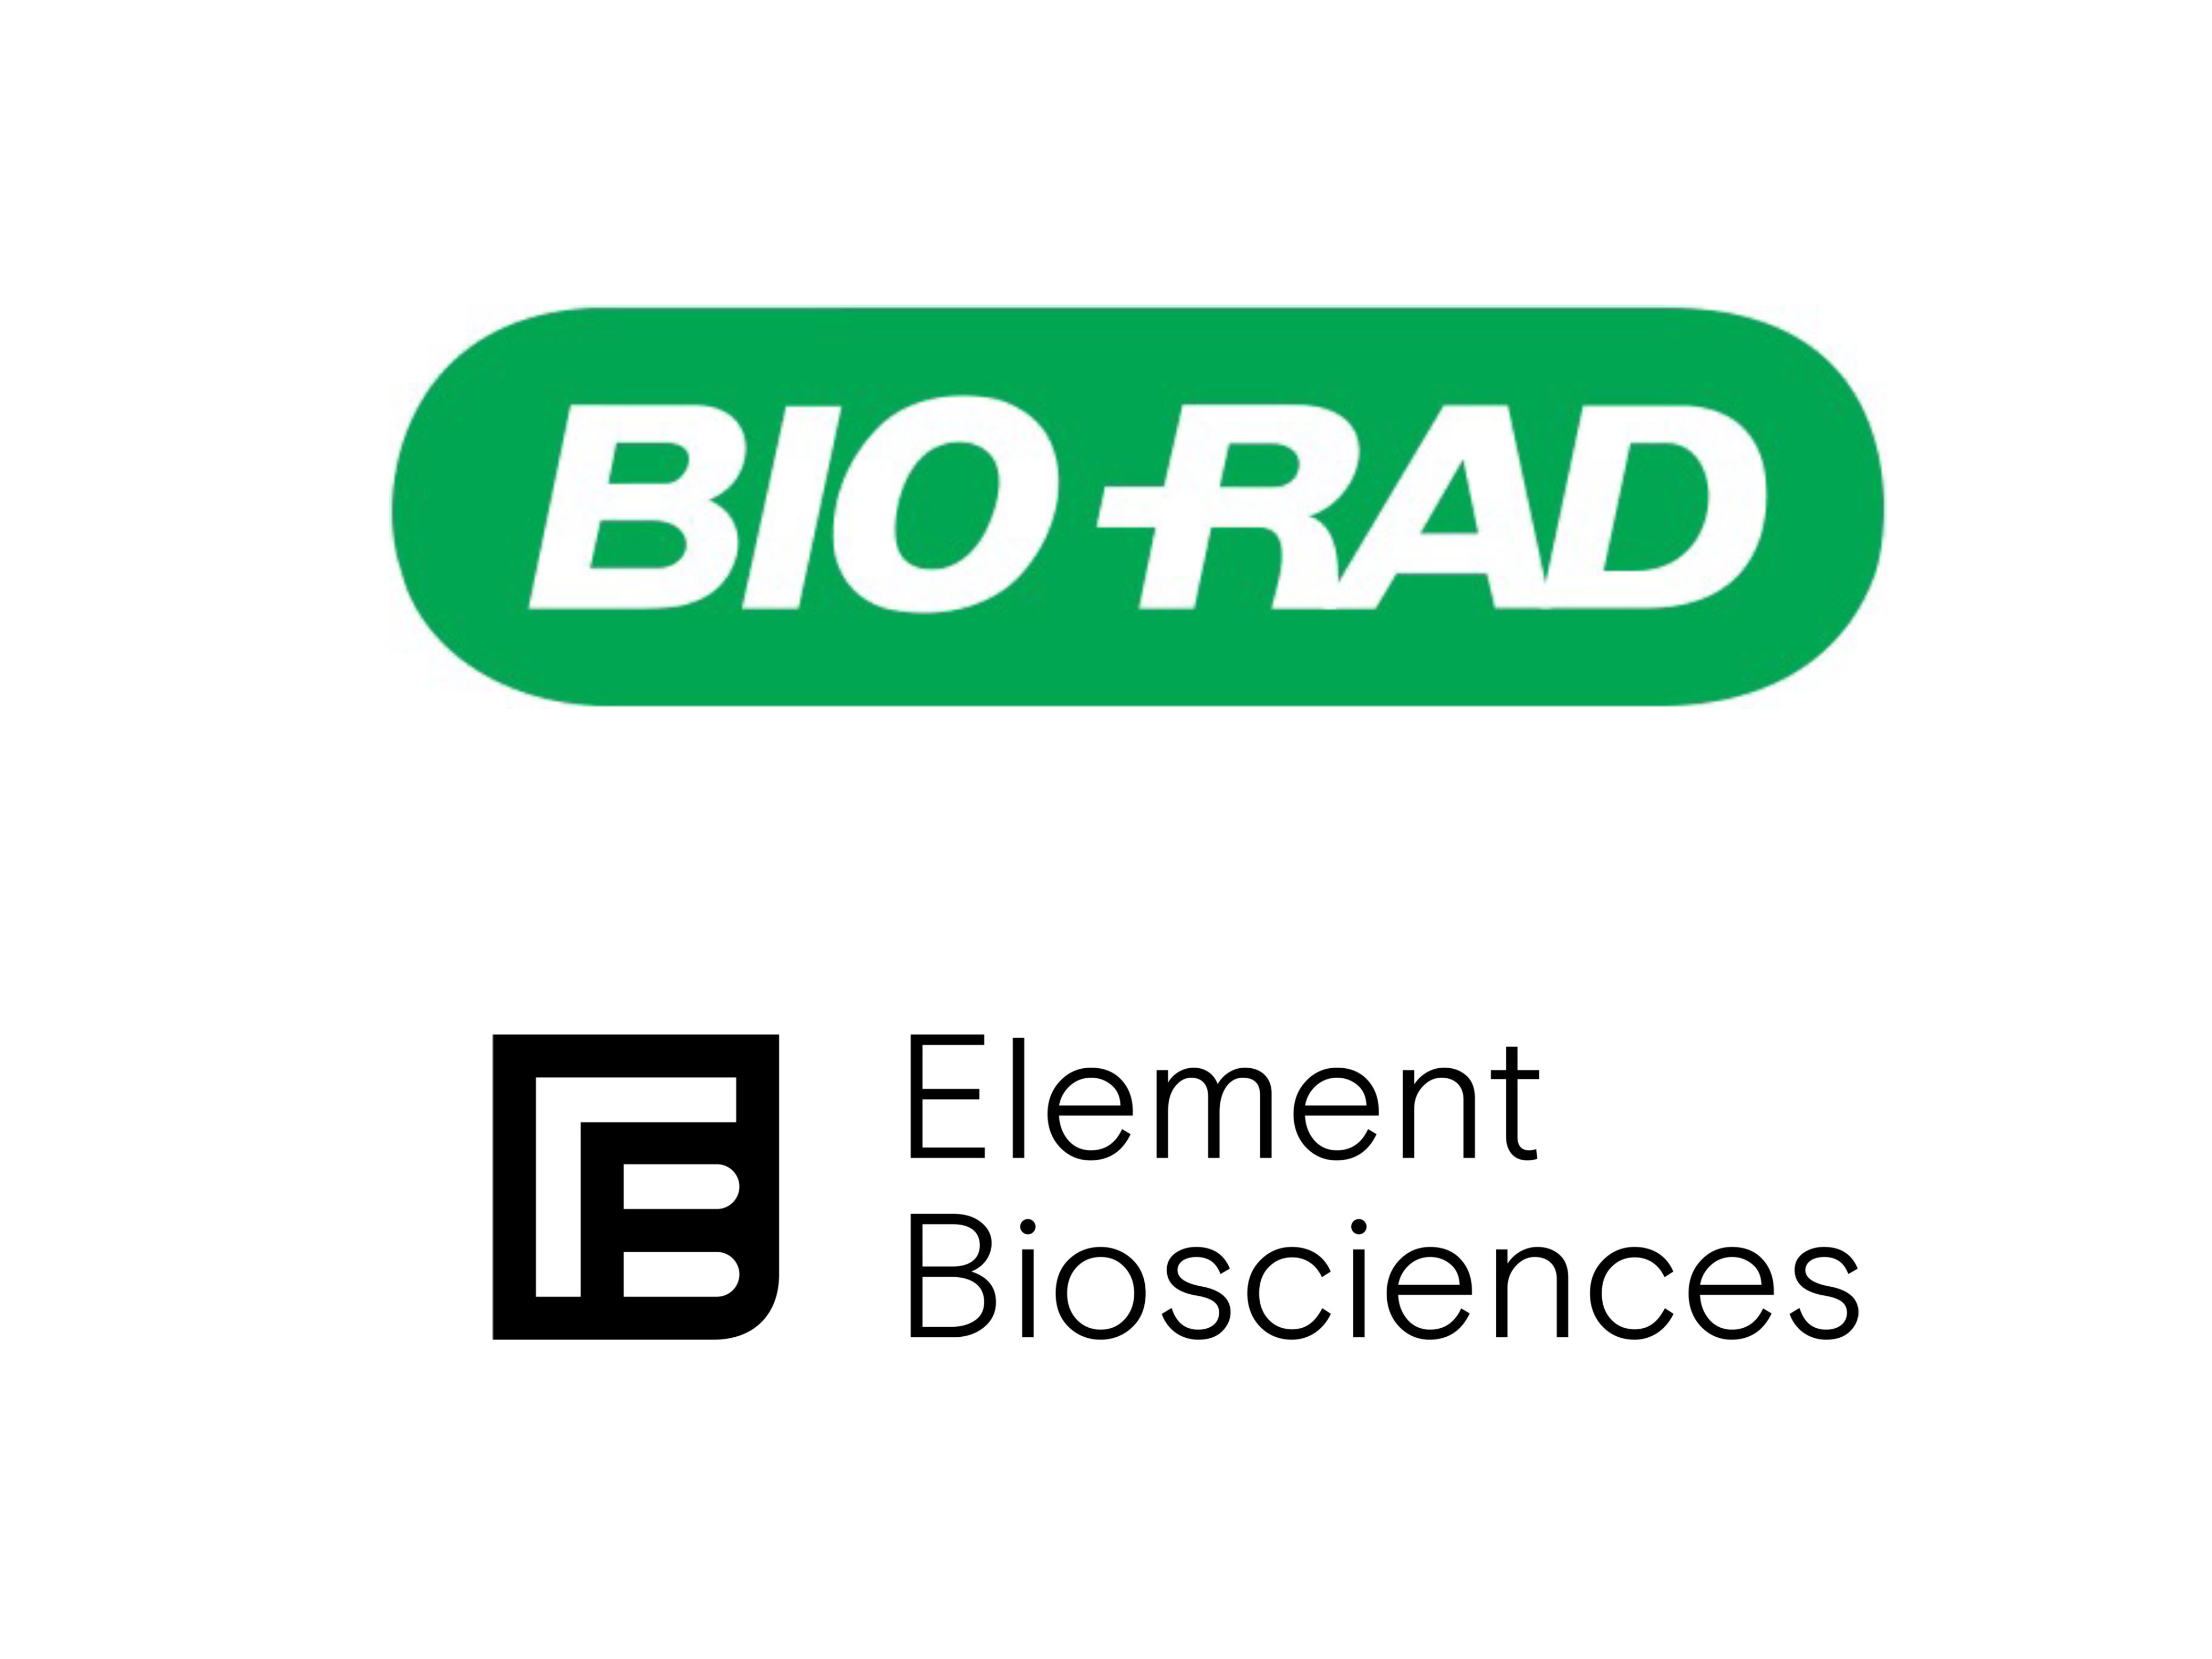 Bio-Rad, Element Biosciences collaborate on RNA library prep with benchtop sequencer